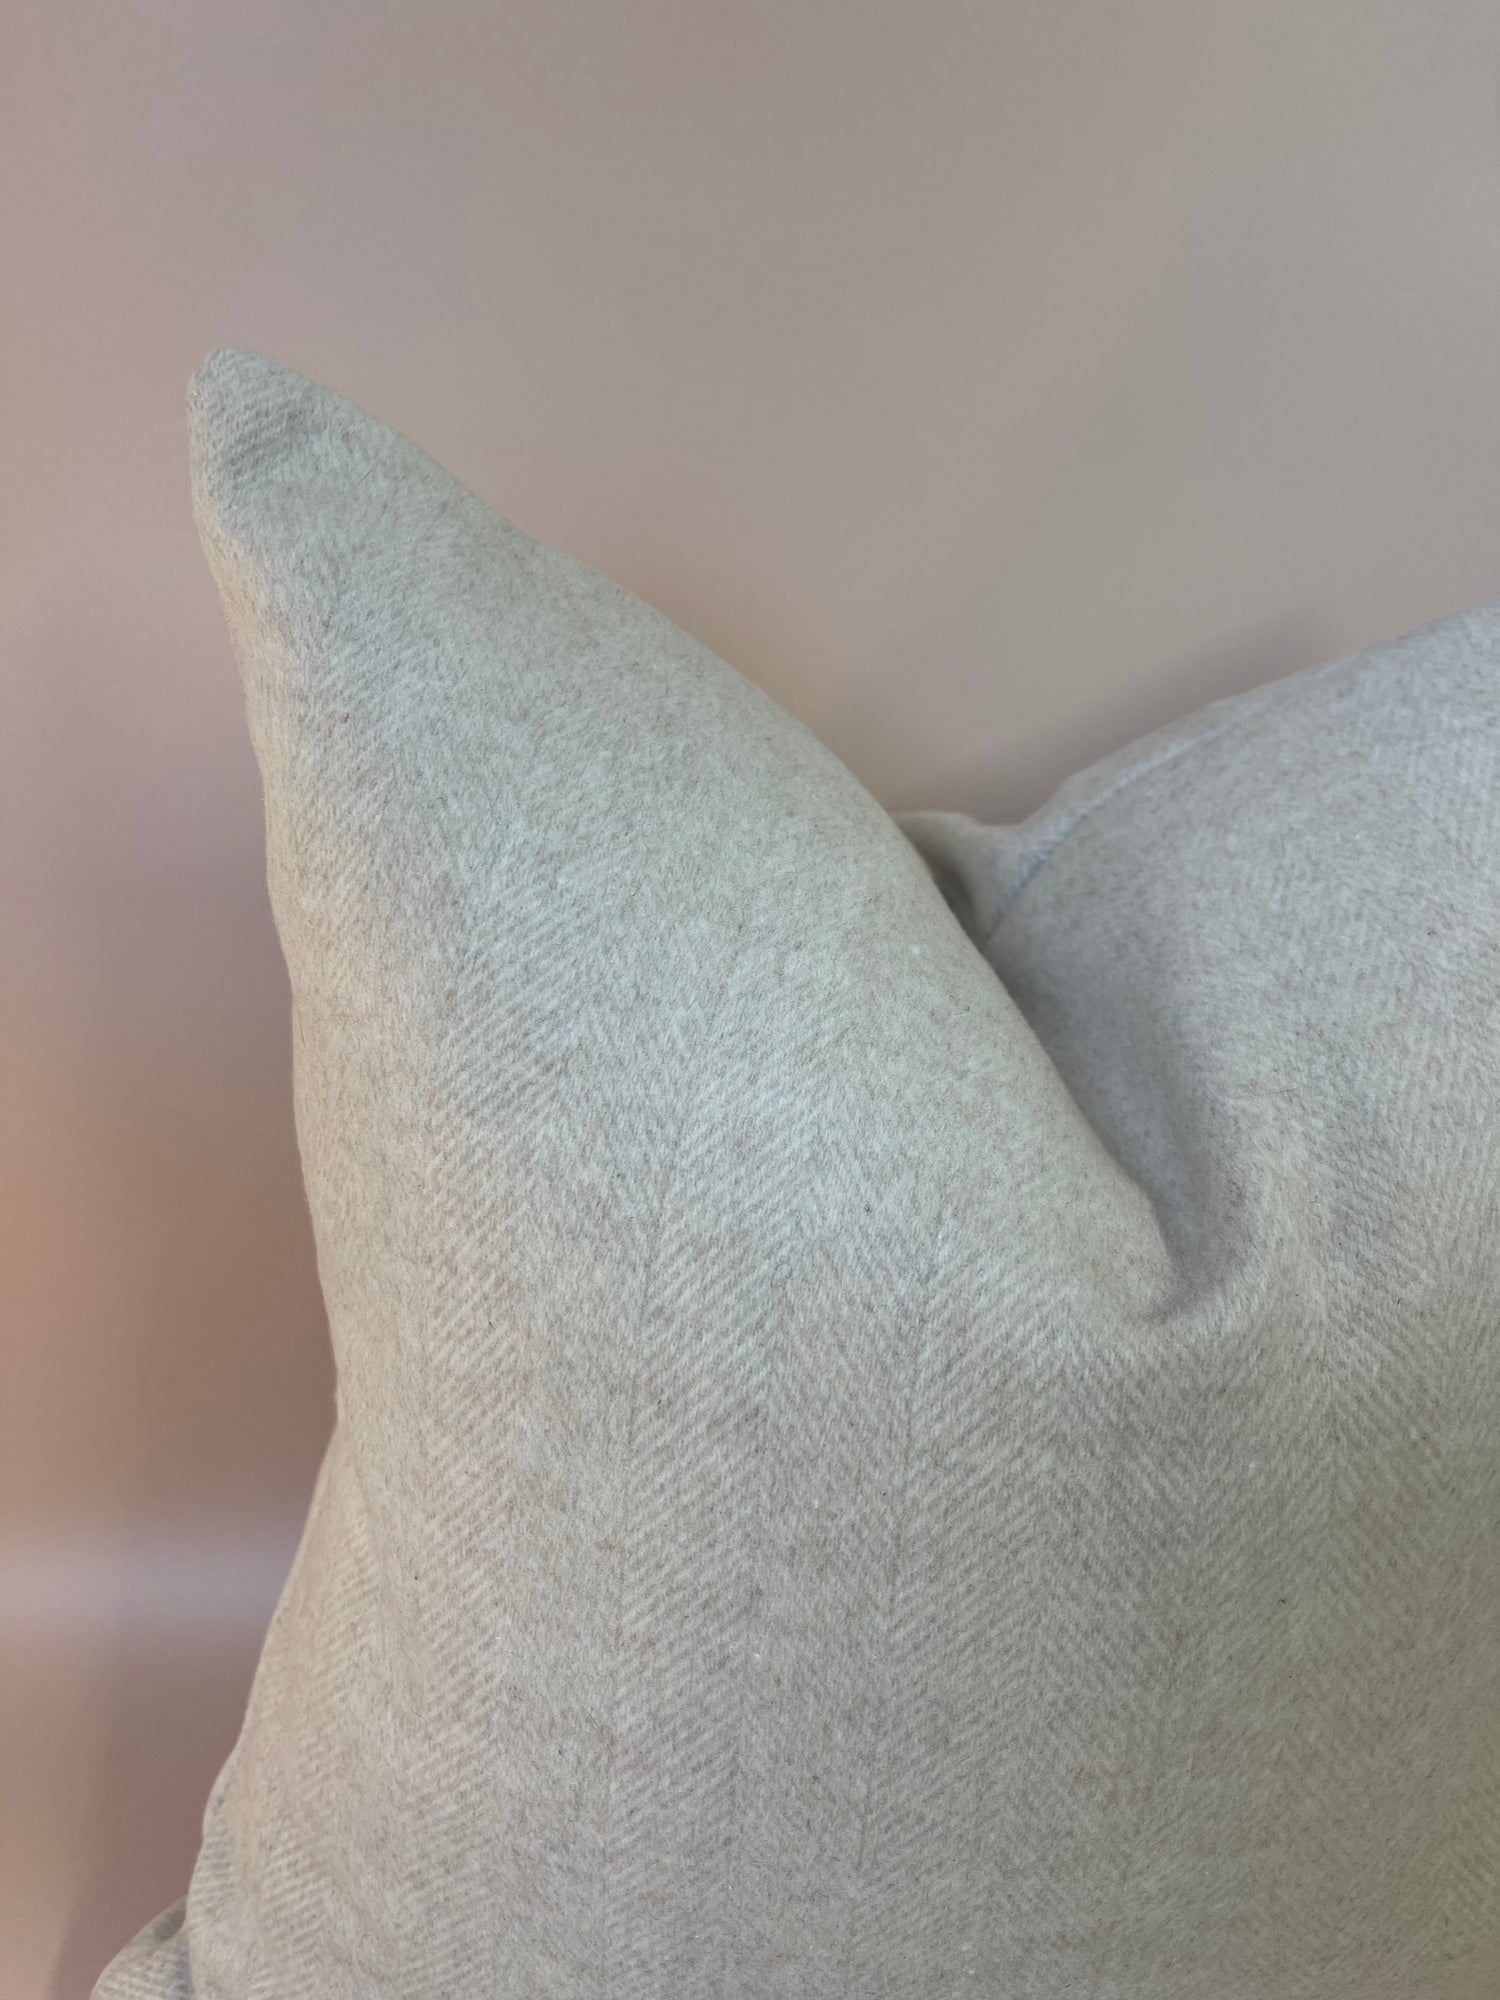 Soft neutral cream wool blend cushion, perfect for adding texture and luxury comfort to your living space.